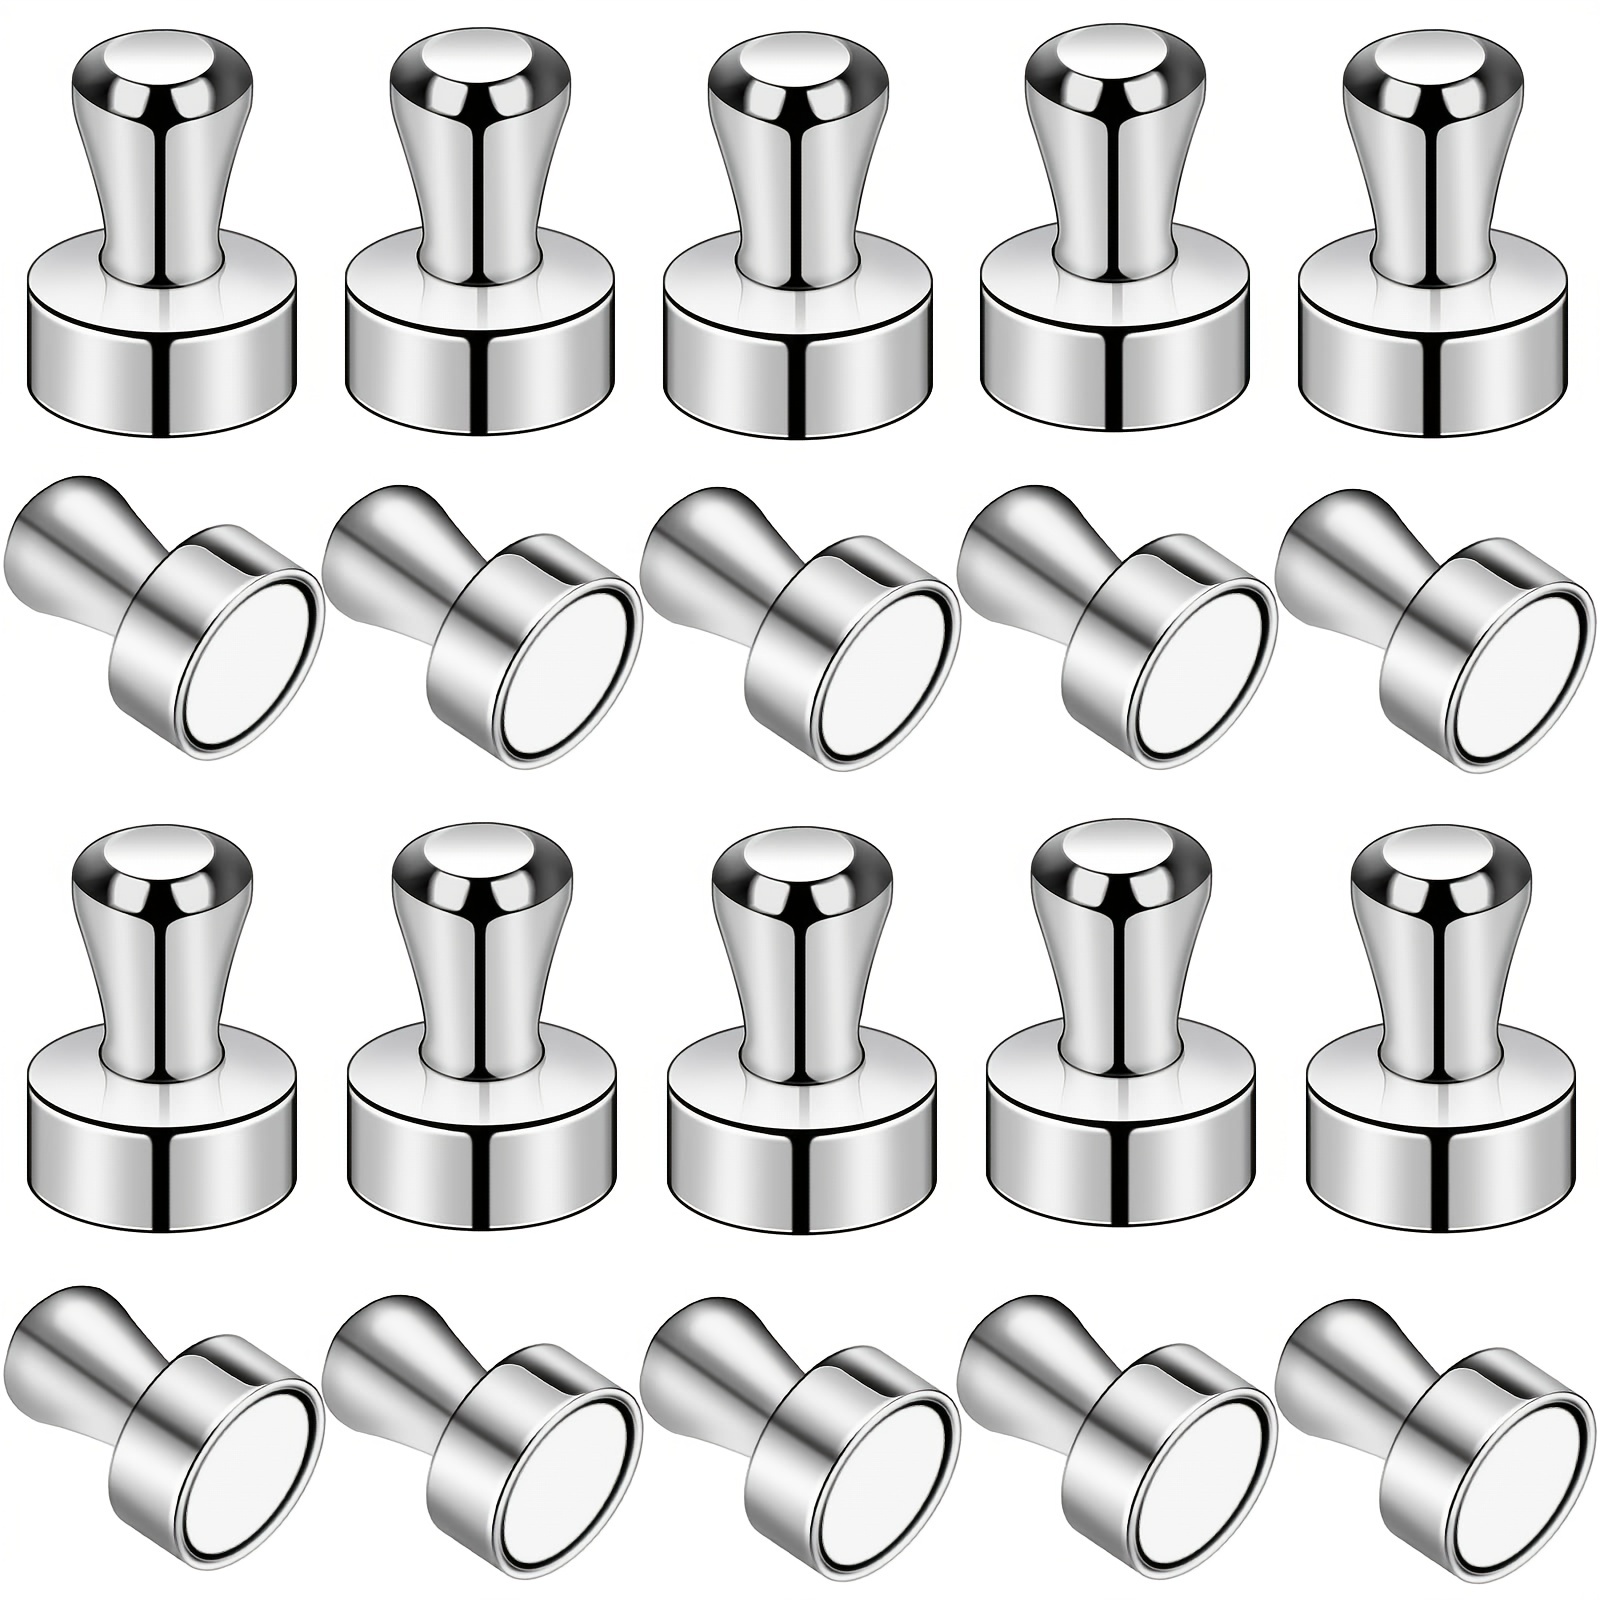 20pcs Per Pack Strong Whiteboard Magnets For Fridge Refrigerator Push Pin Office Classroom And Map